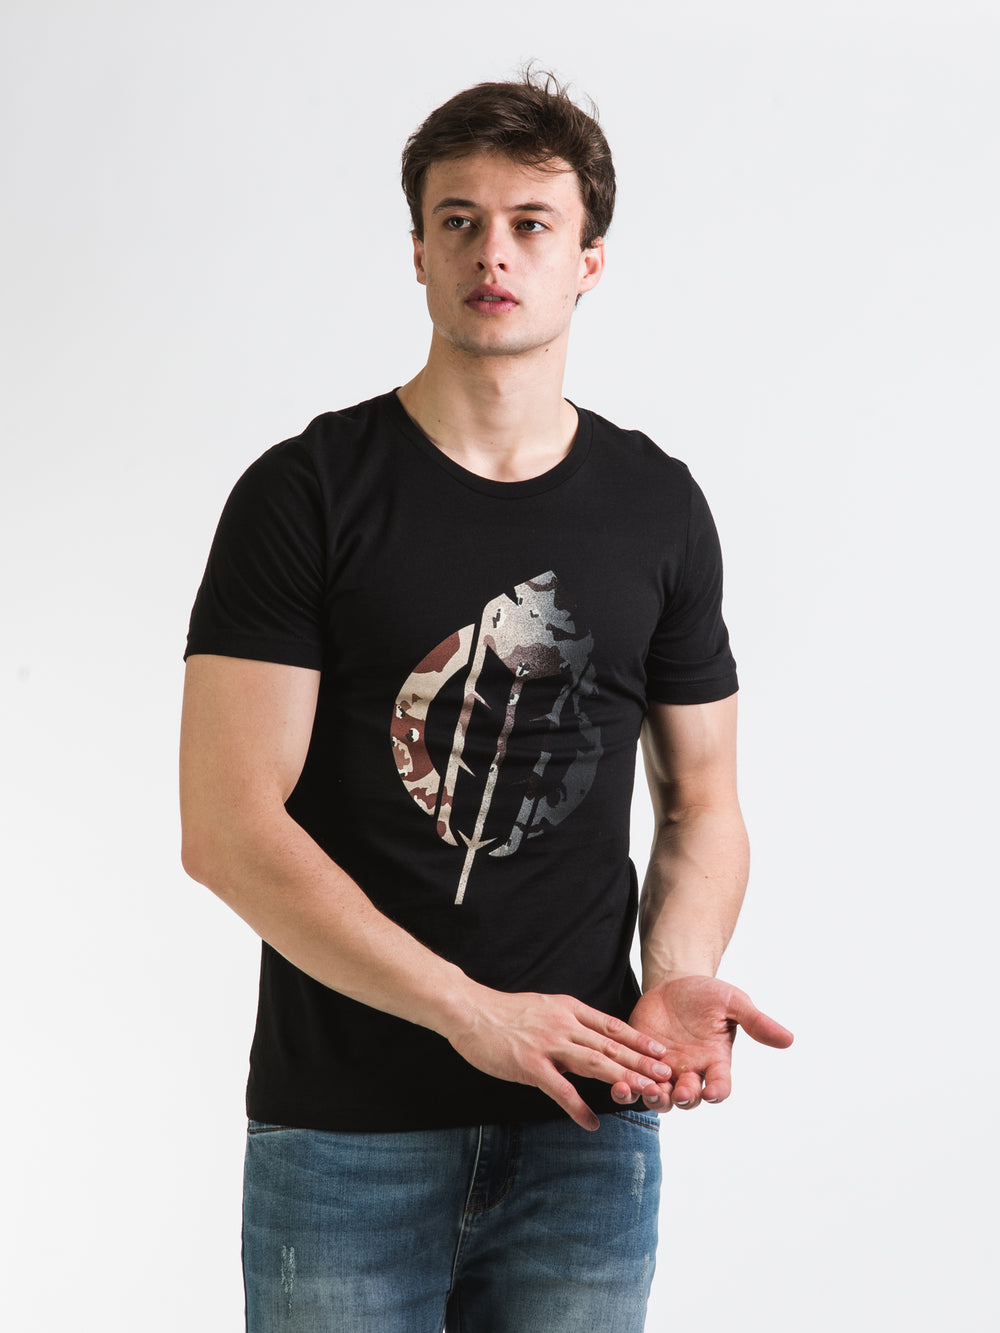 SECTION 35 BLACK CAMO TALKING FEATHER T-SHIRT - CLEARANCE